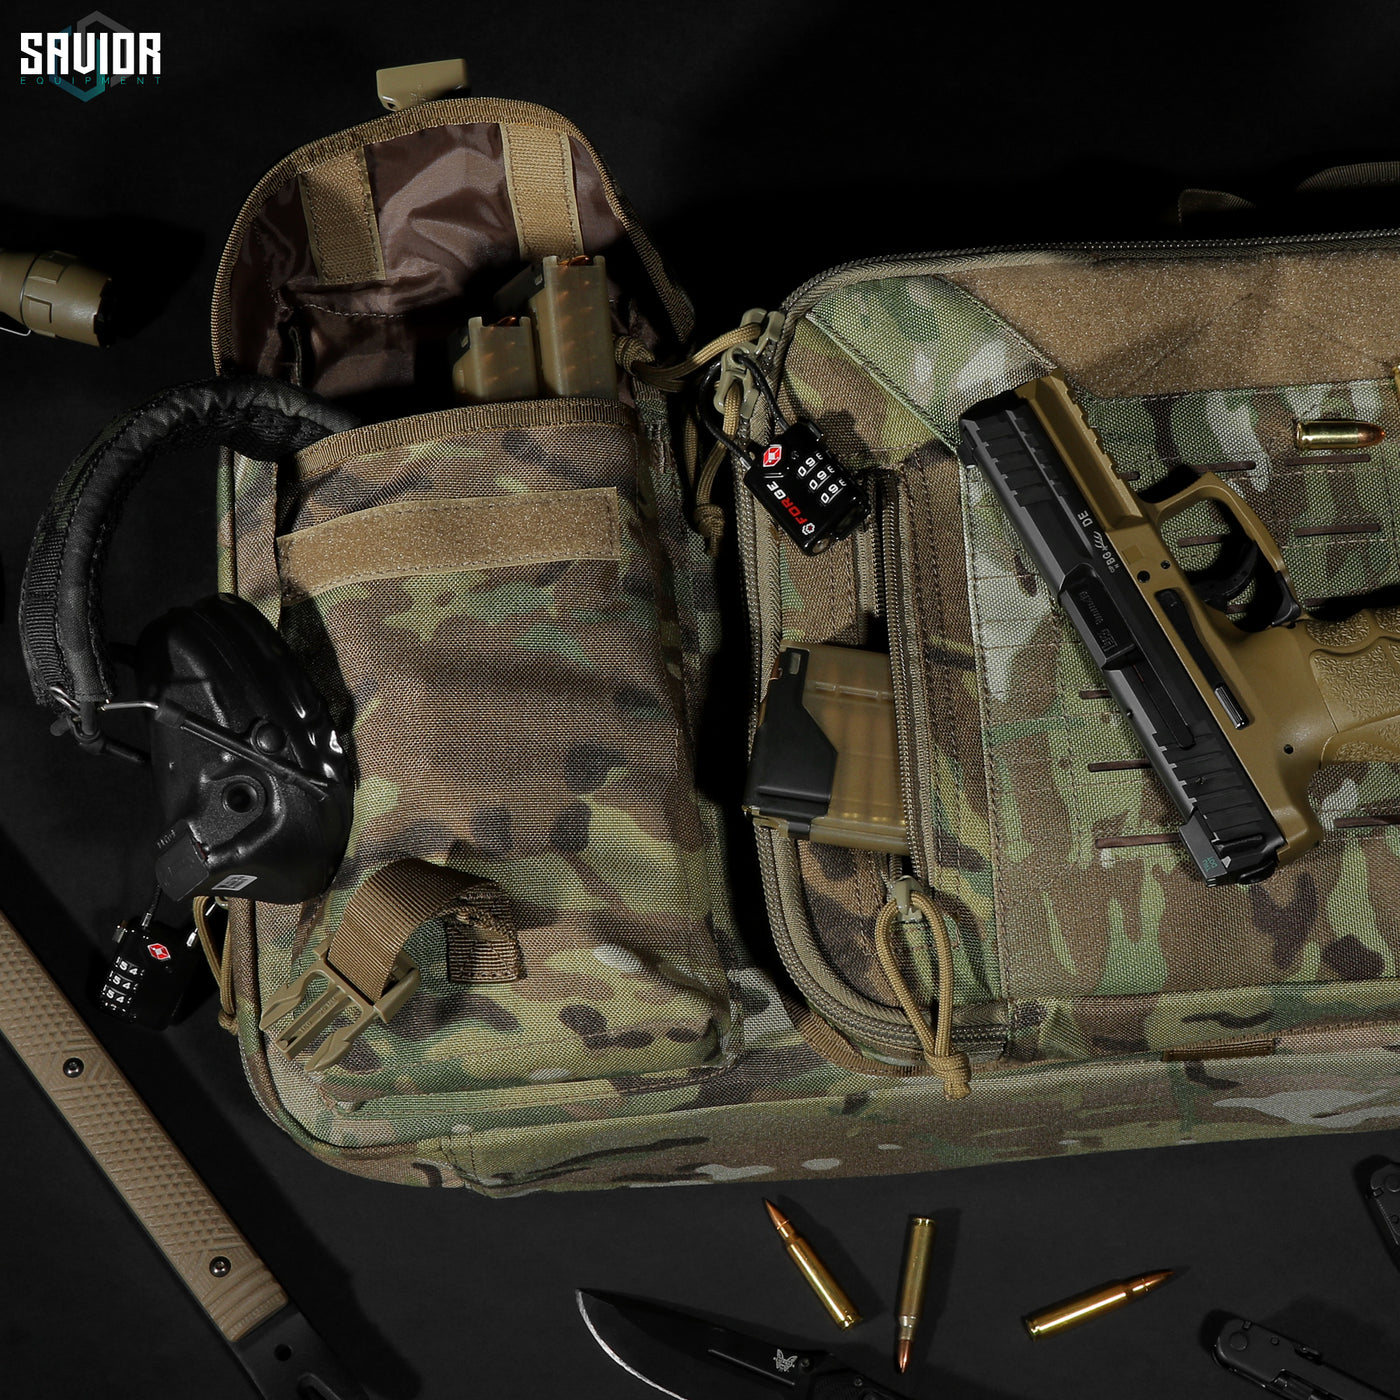 Everything You'll Need - Spacious enough to easily store magazines, hearing protection, and other accessories. Lockable zipper sliders for both firearm compartments. Accessories shown not included.